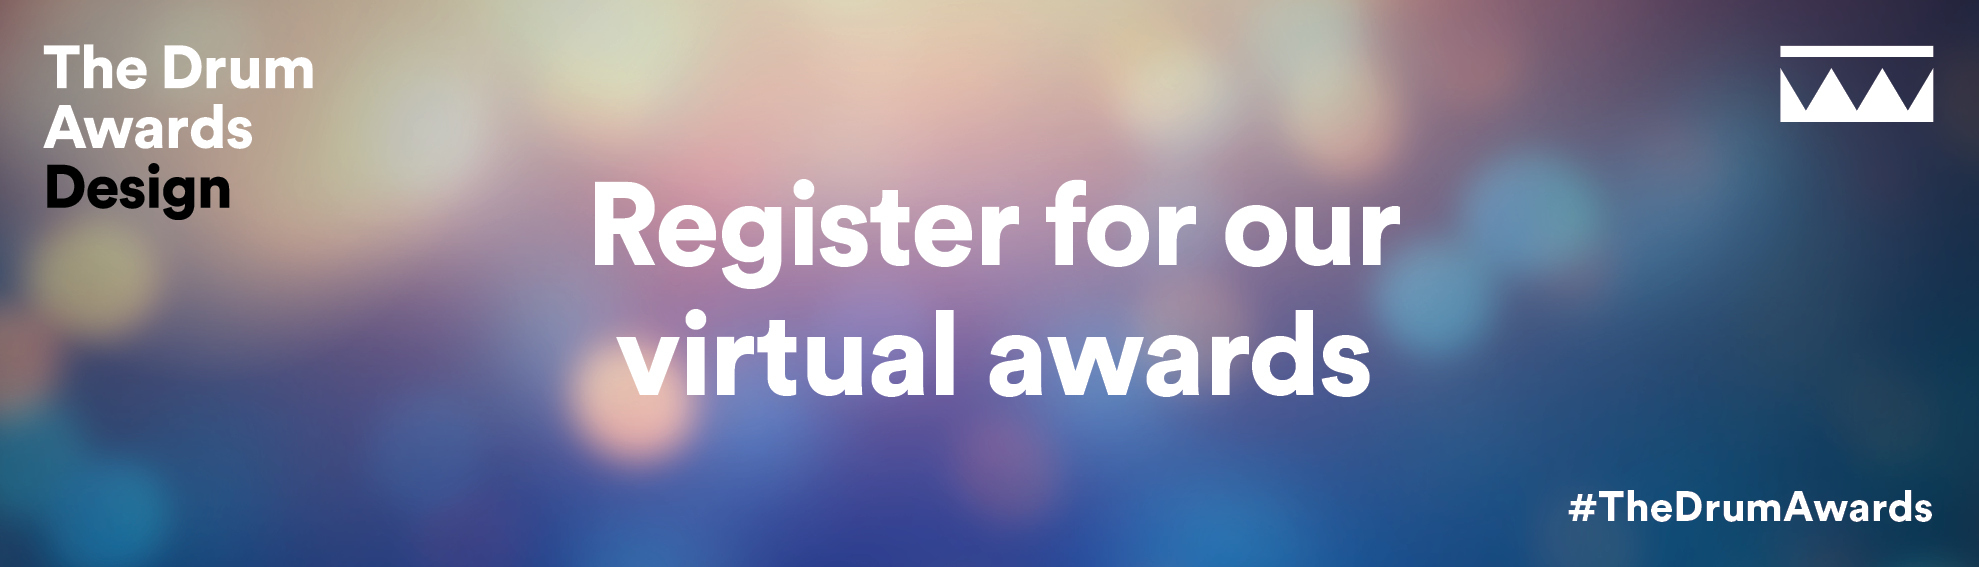 The Drum Awards for Design - Register for our virtual awards